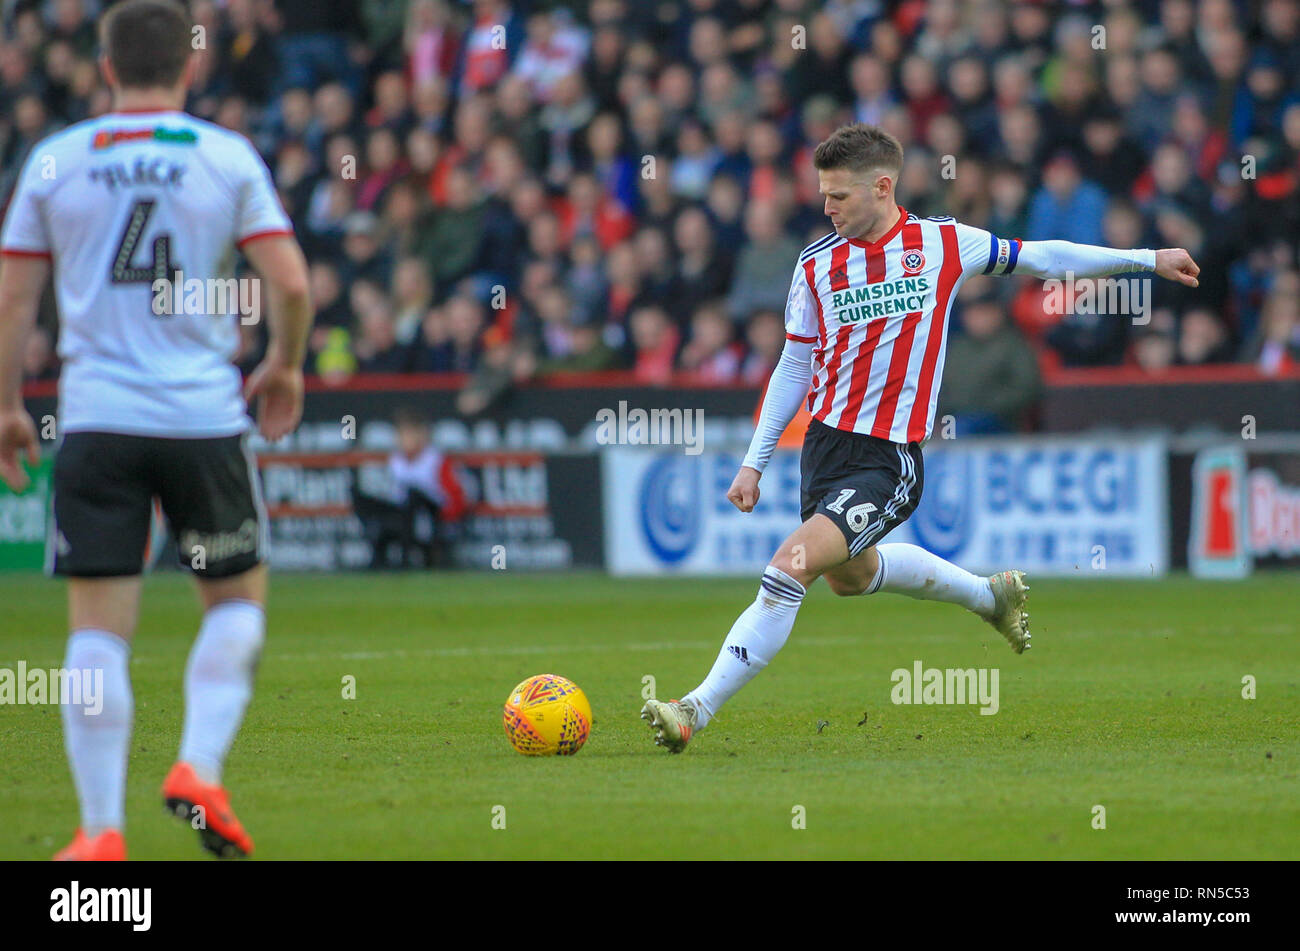 16th February 2019, Bramall Lane, Sheffield, England; Sky Bet Championship, Sheffield United vs Reading ;  Oliver Norwood (16) of Sheffield United crosses the ball  Credit: Craig Milner/News Images  English Football League images are subject to DataCo Licence Stock Photo